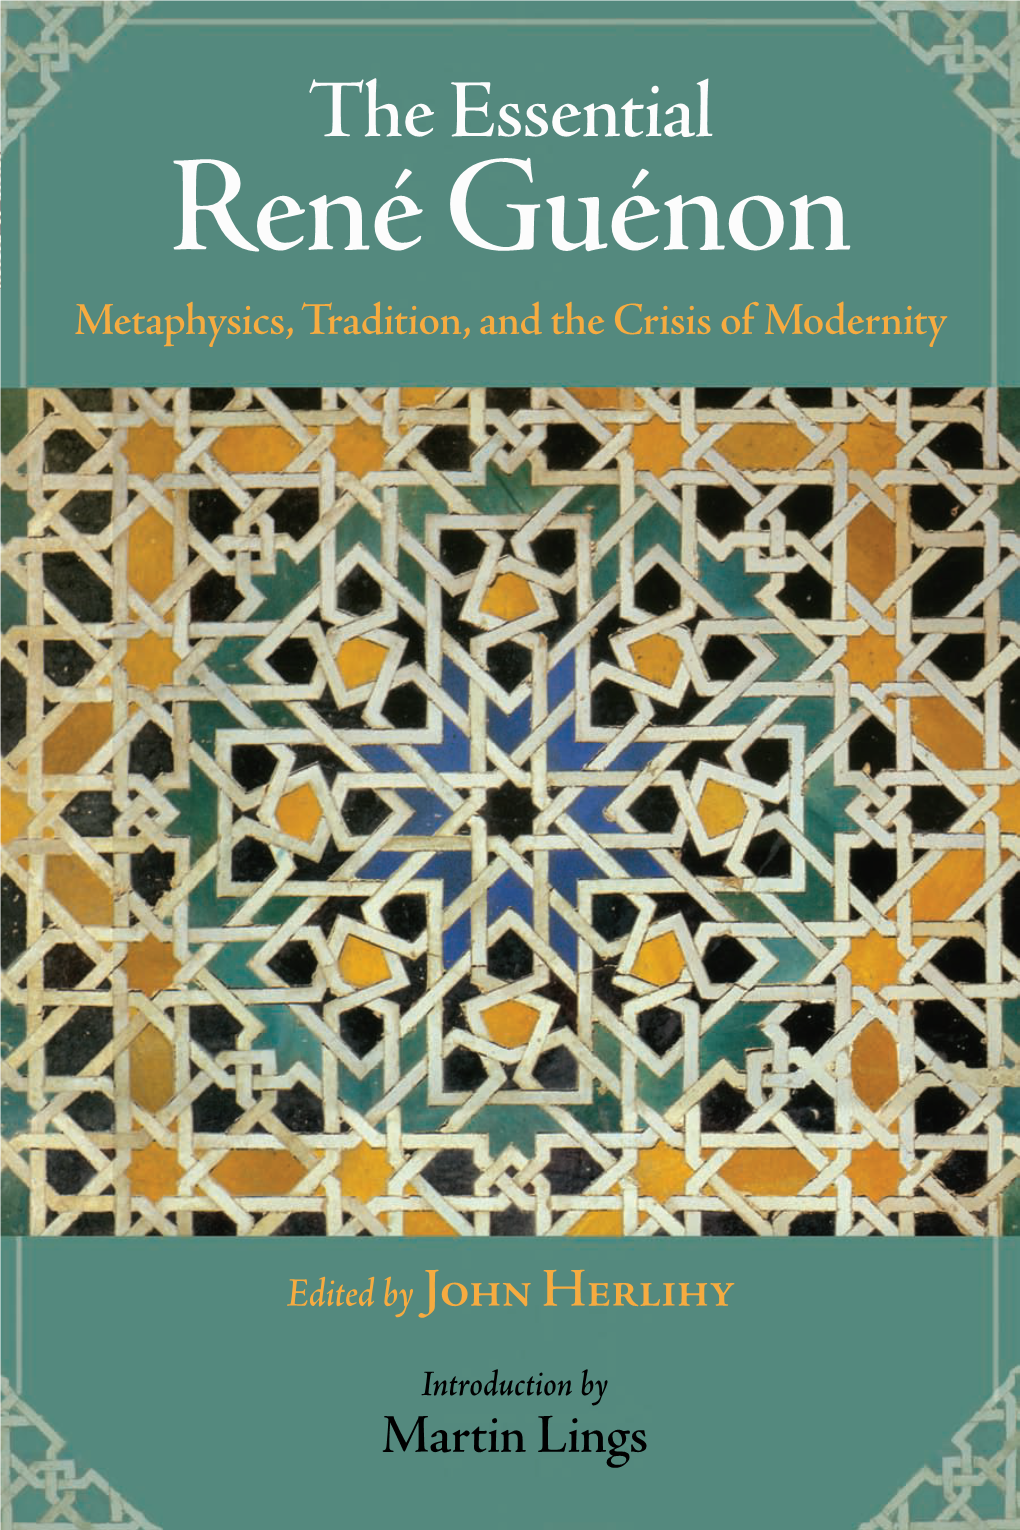 The Essential René Guénon: Metaphysics, Tradition, and the Crisis of Modernity Appears As One of Our Selections in the Perennial Philosophy Series